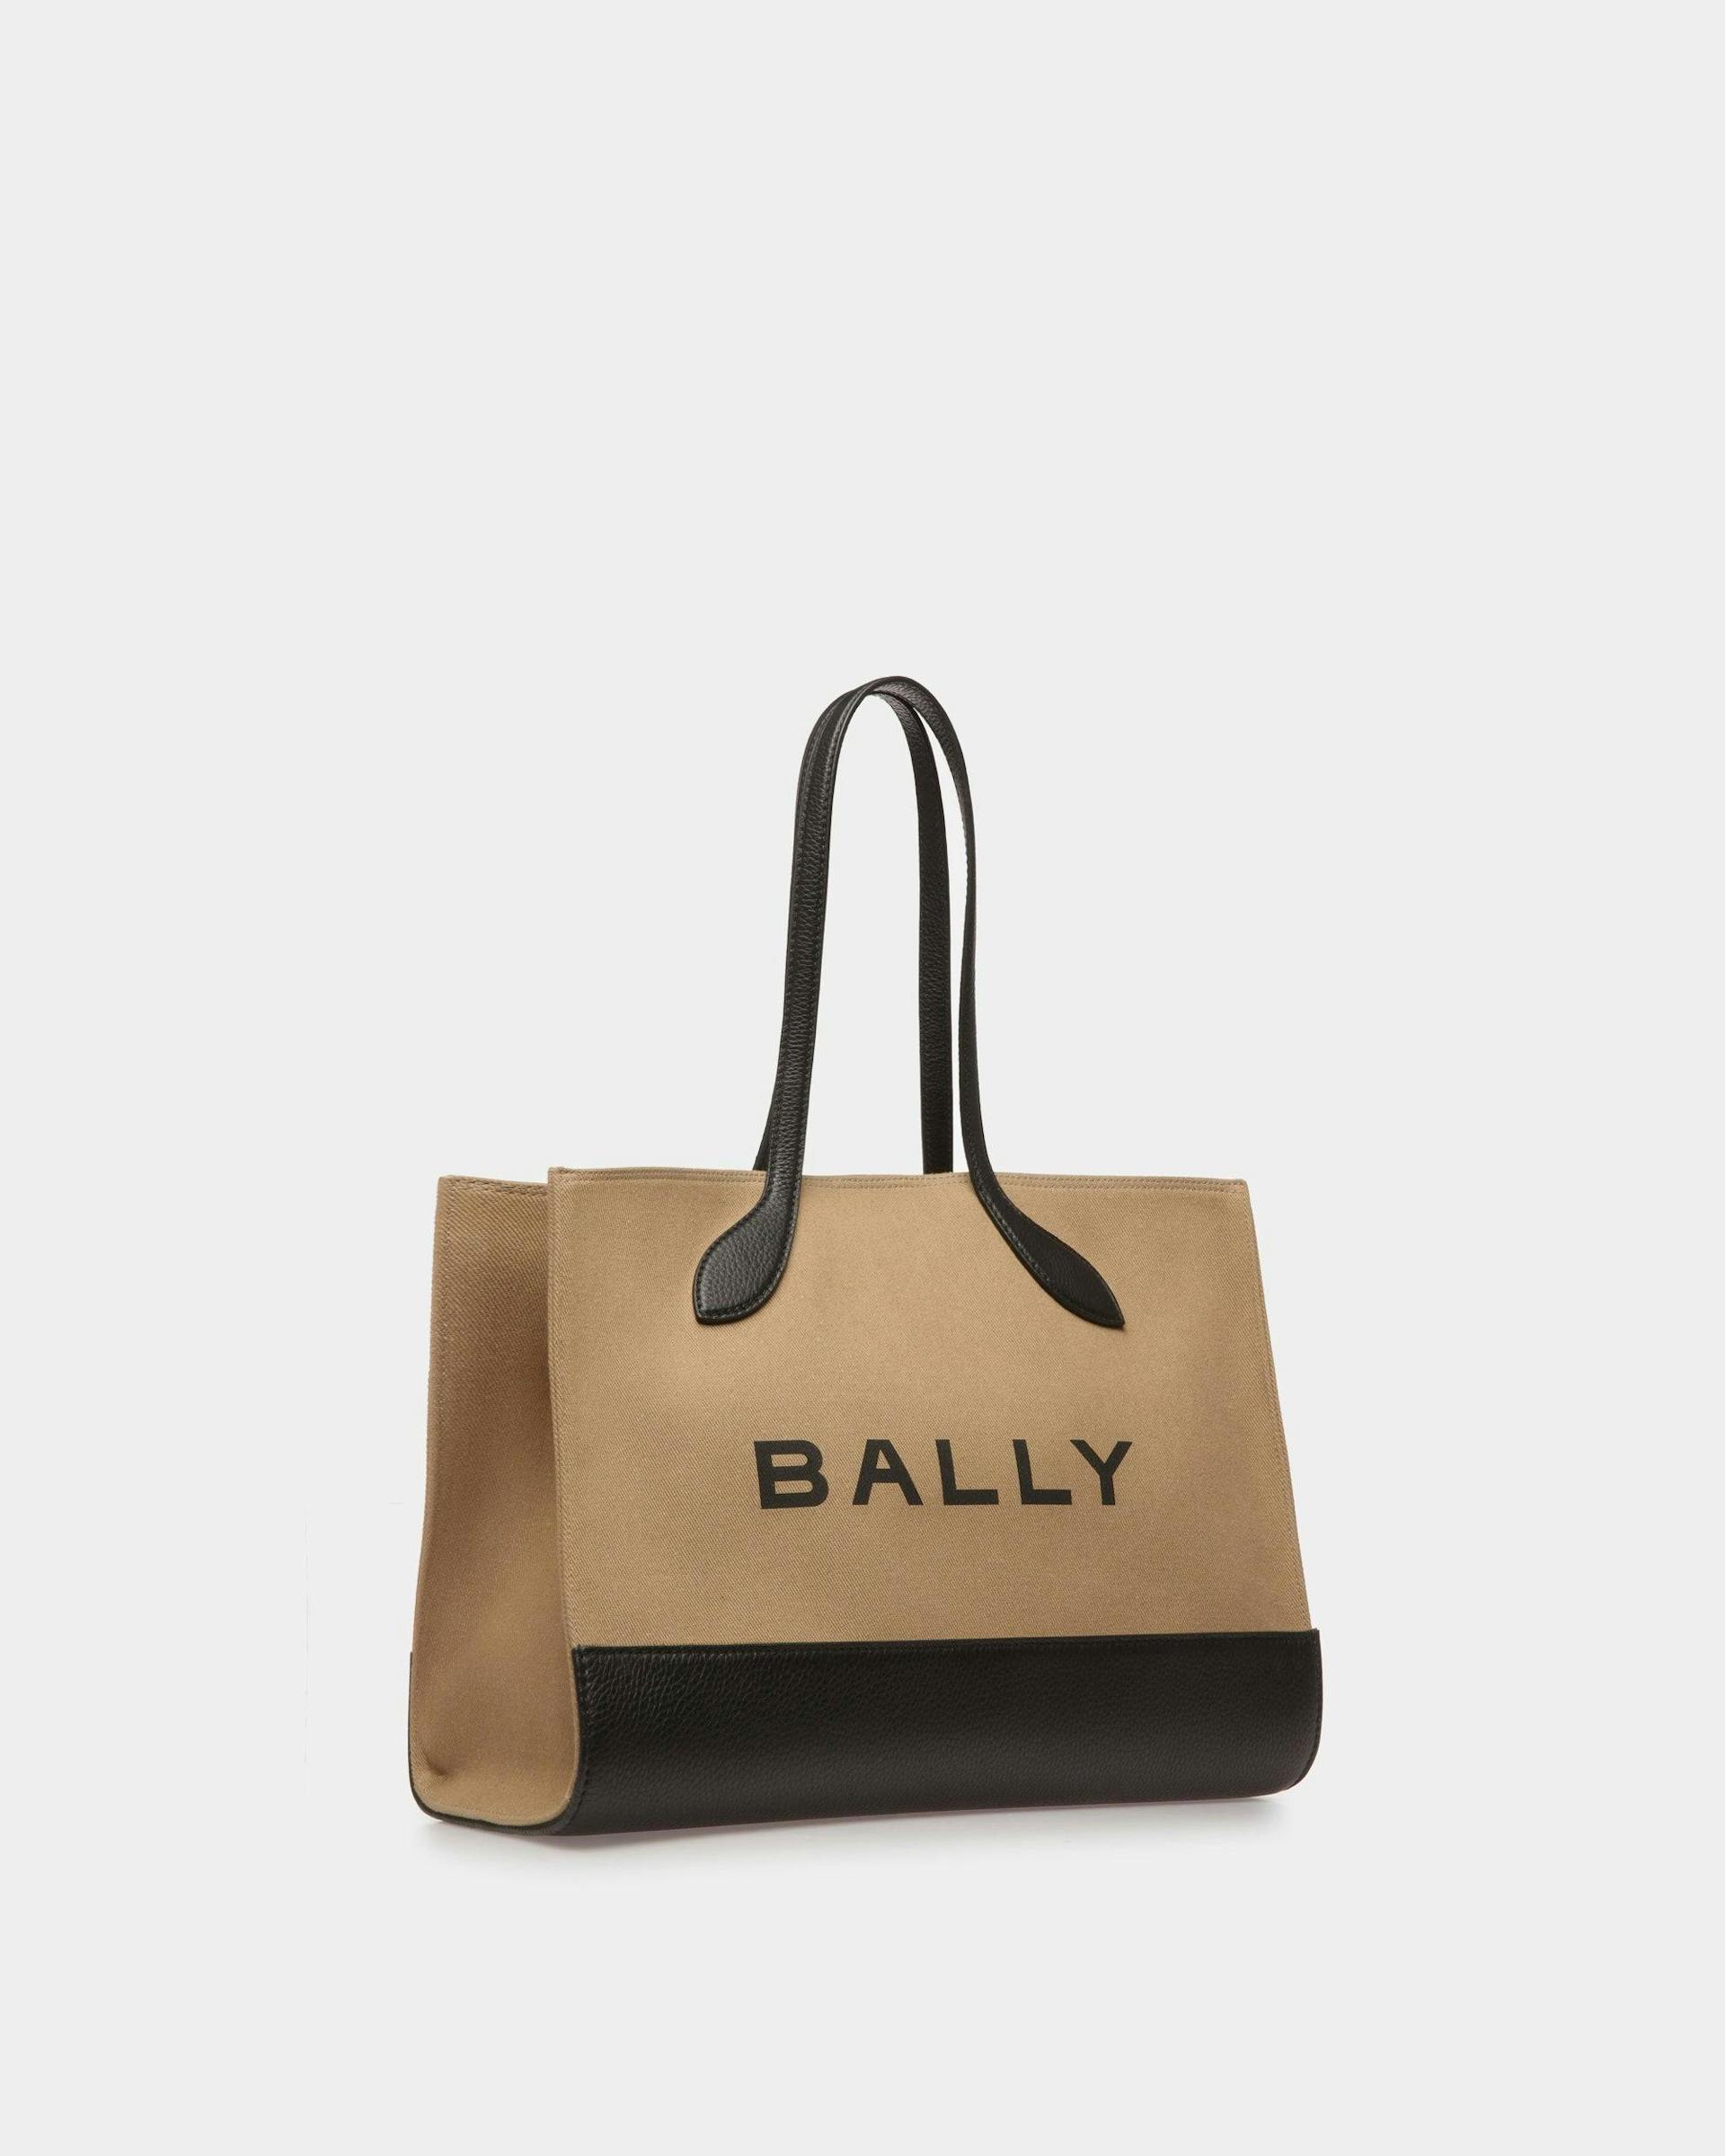 Women's Bar Tote Bag In Sand And Black Fabric | Bally | Still Life 3/4 Front